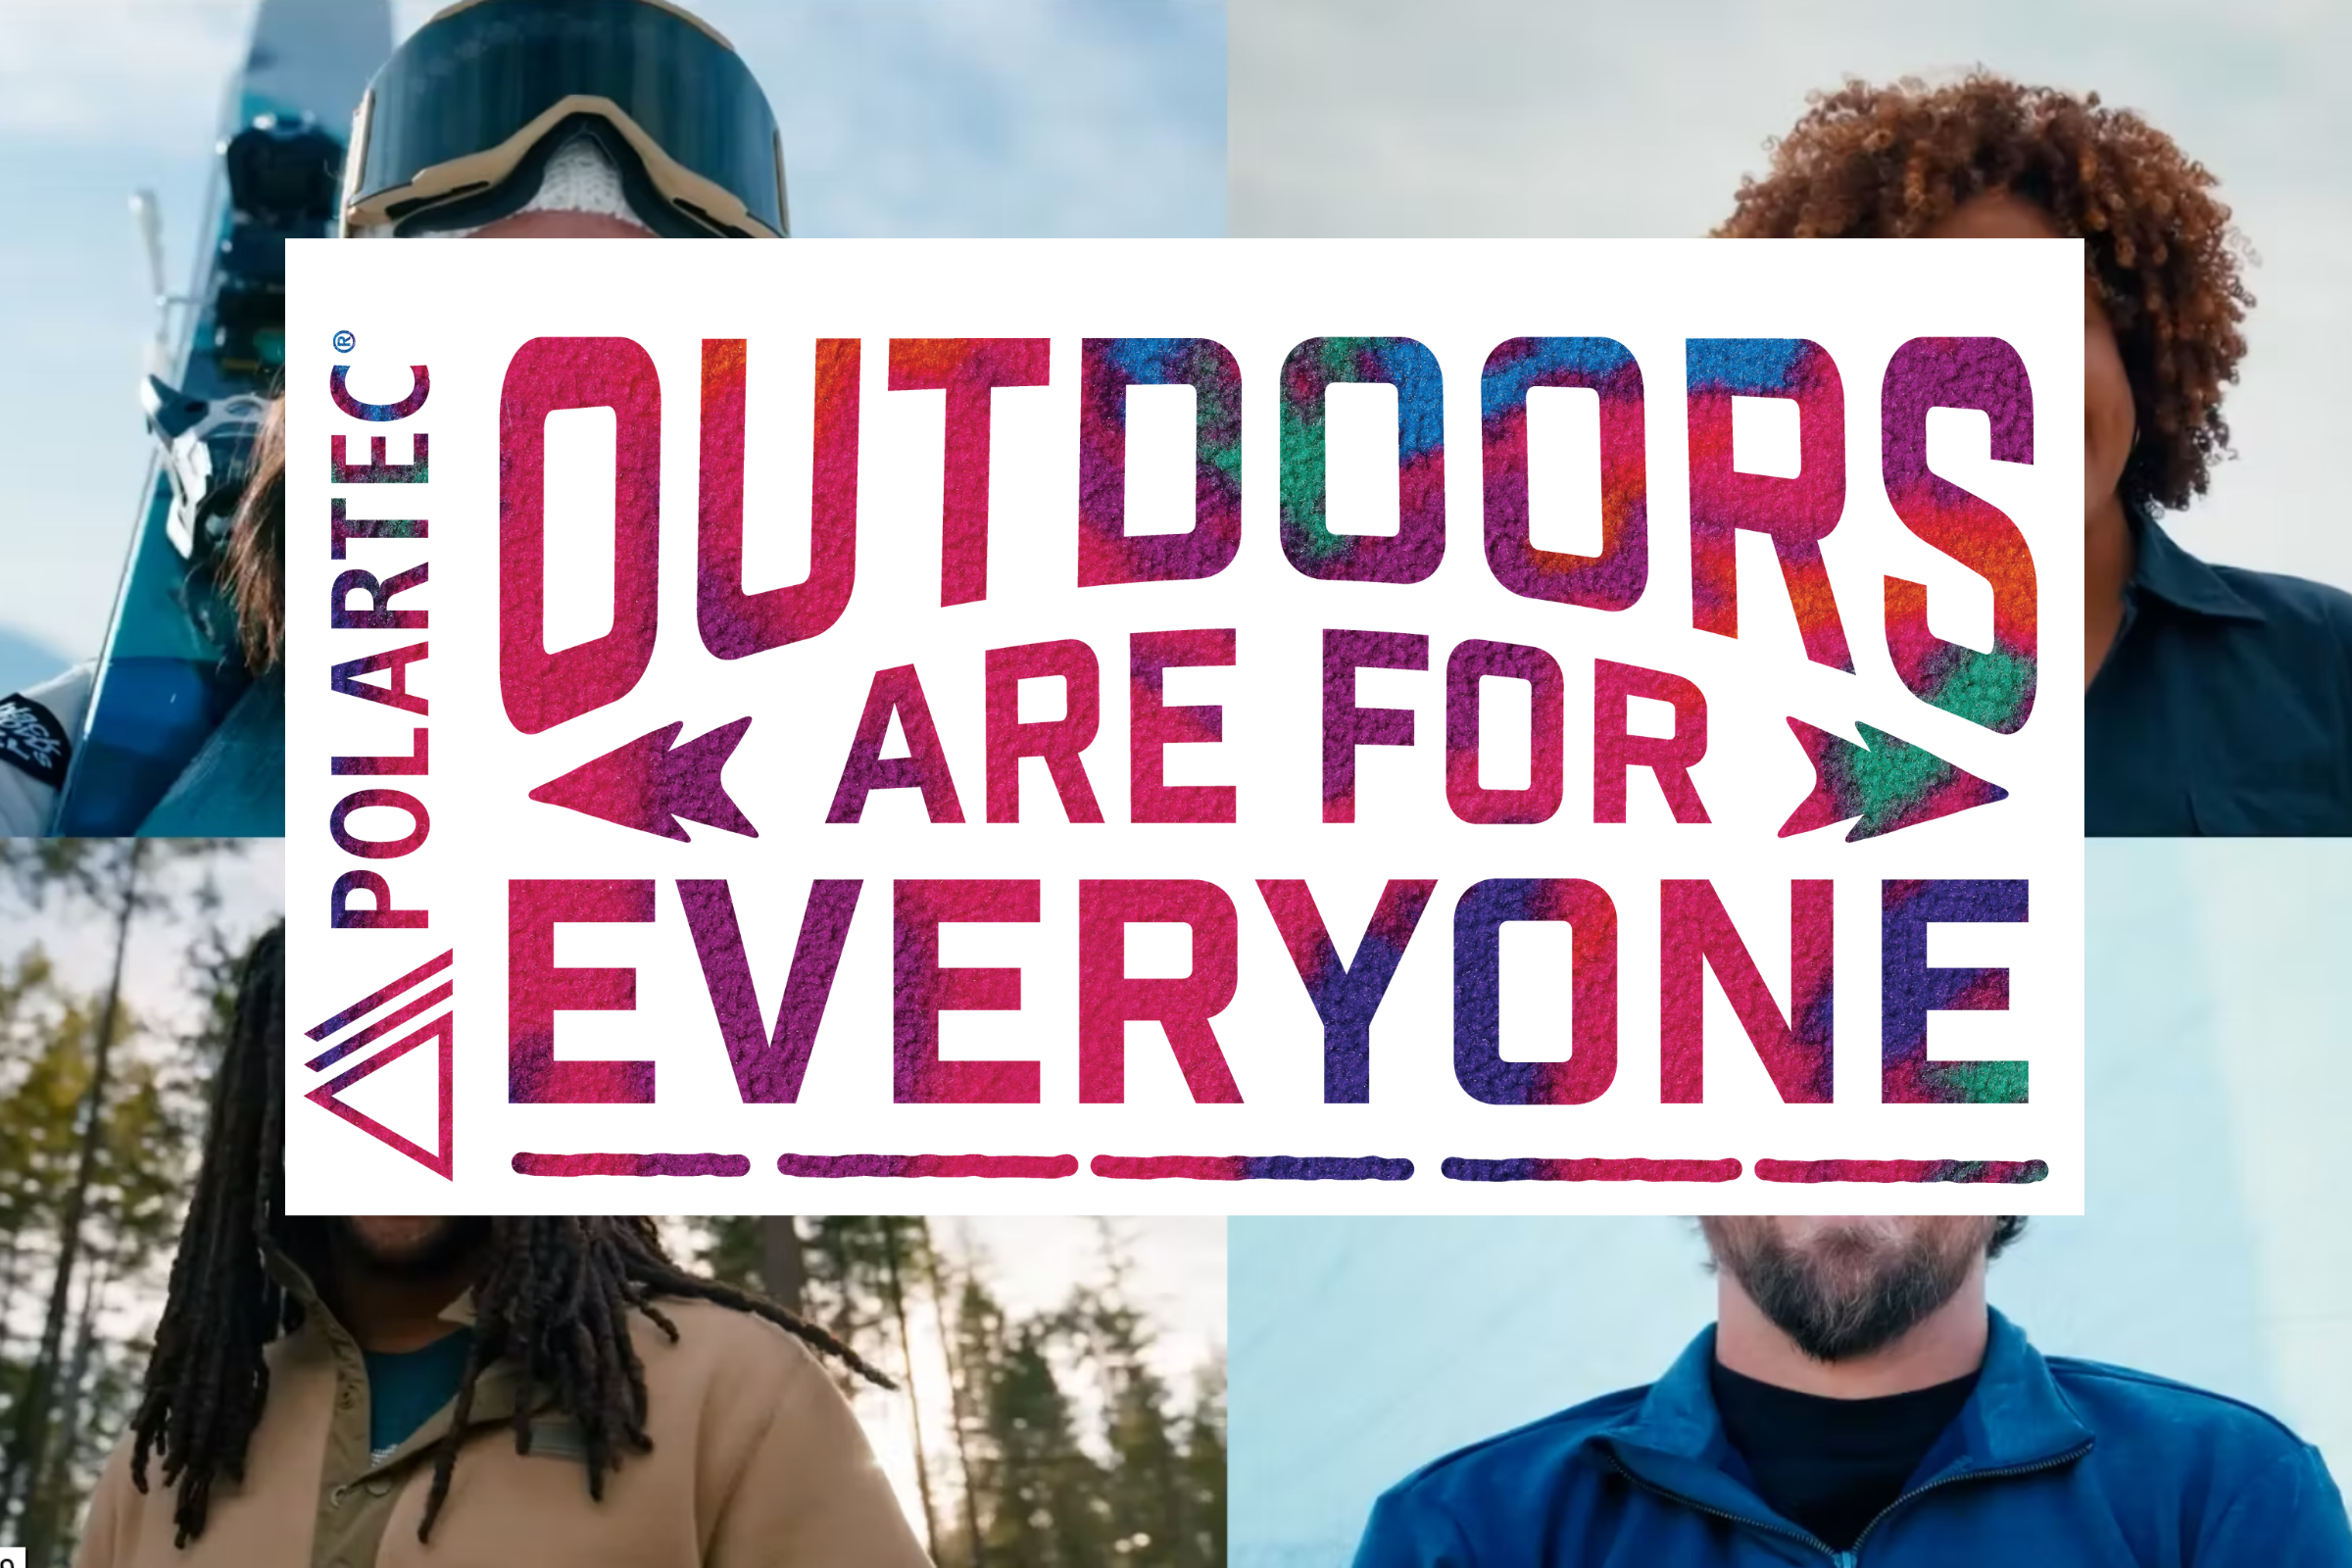 Video: ‘Outdoors are for Everyone’ says Polartec